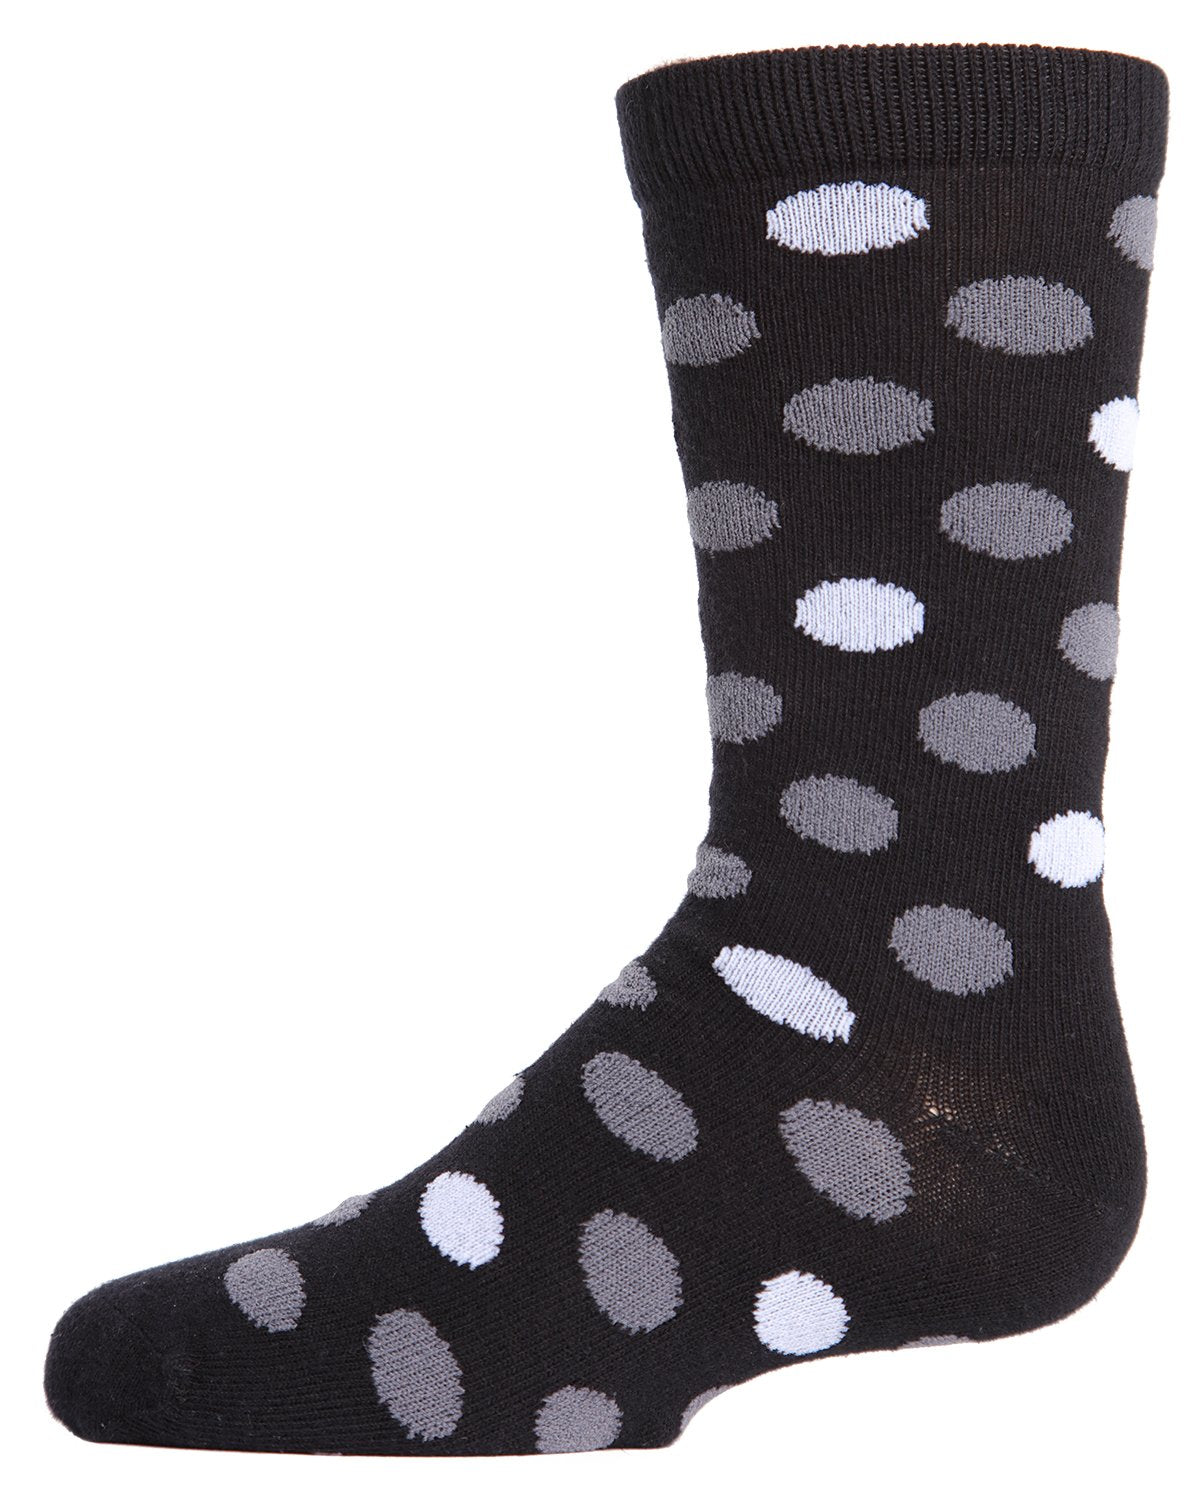 Boys' Spots and Dots Ribbed Cotton Crew Socks